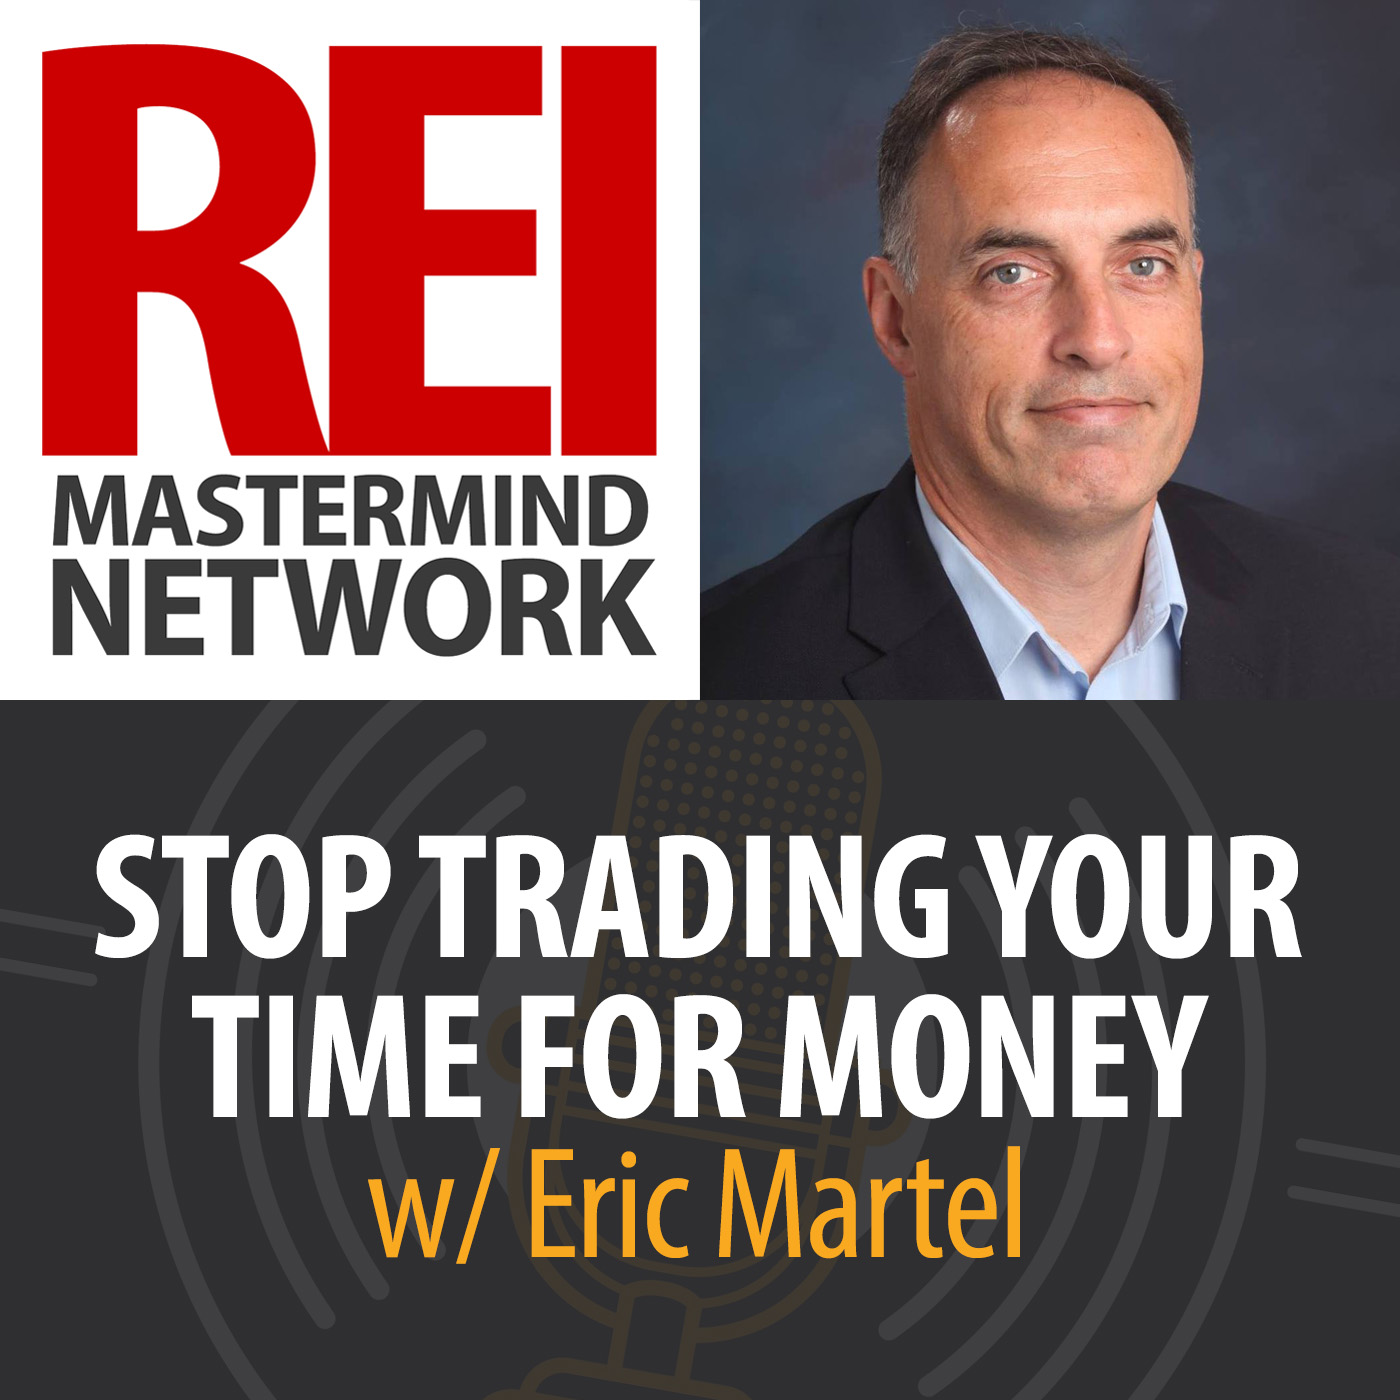 Stop Trading Your Time for Money with Eric Martel